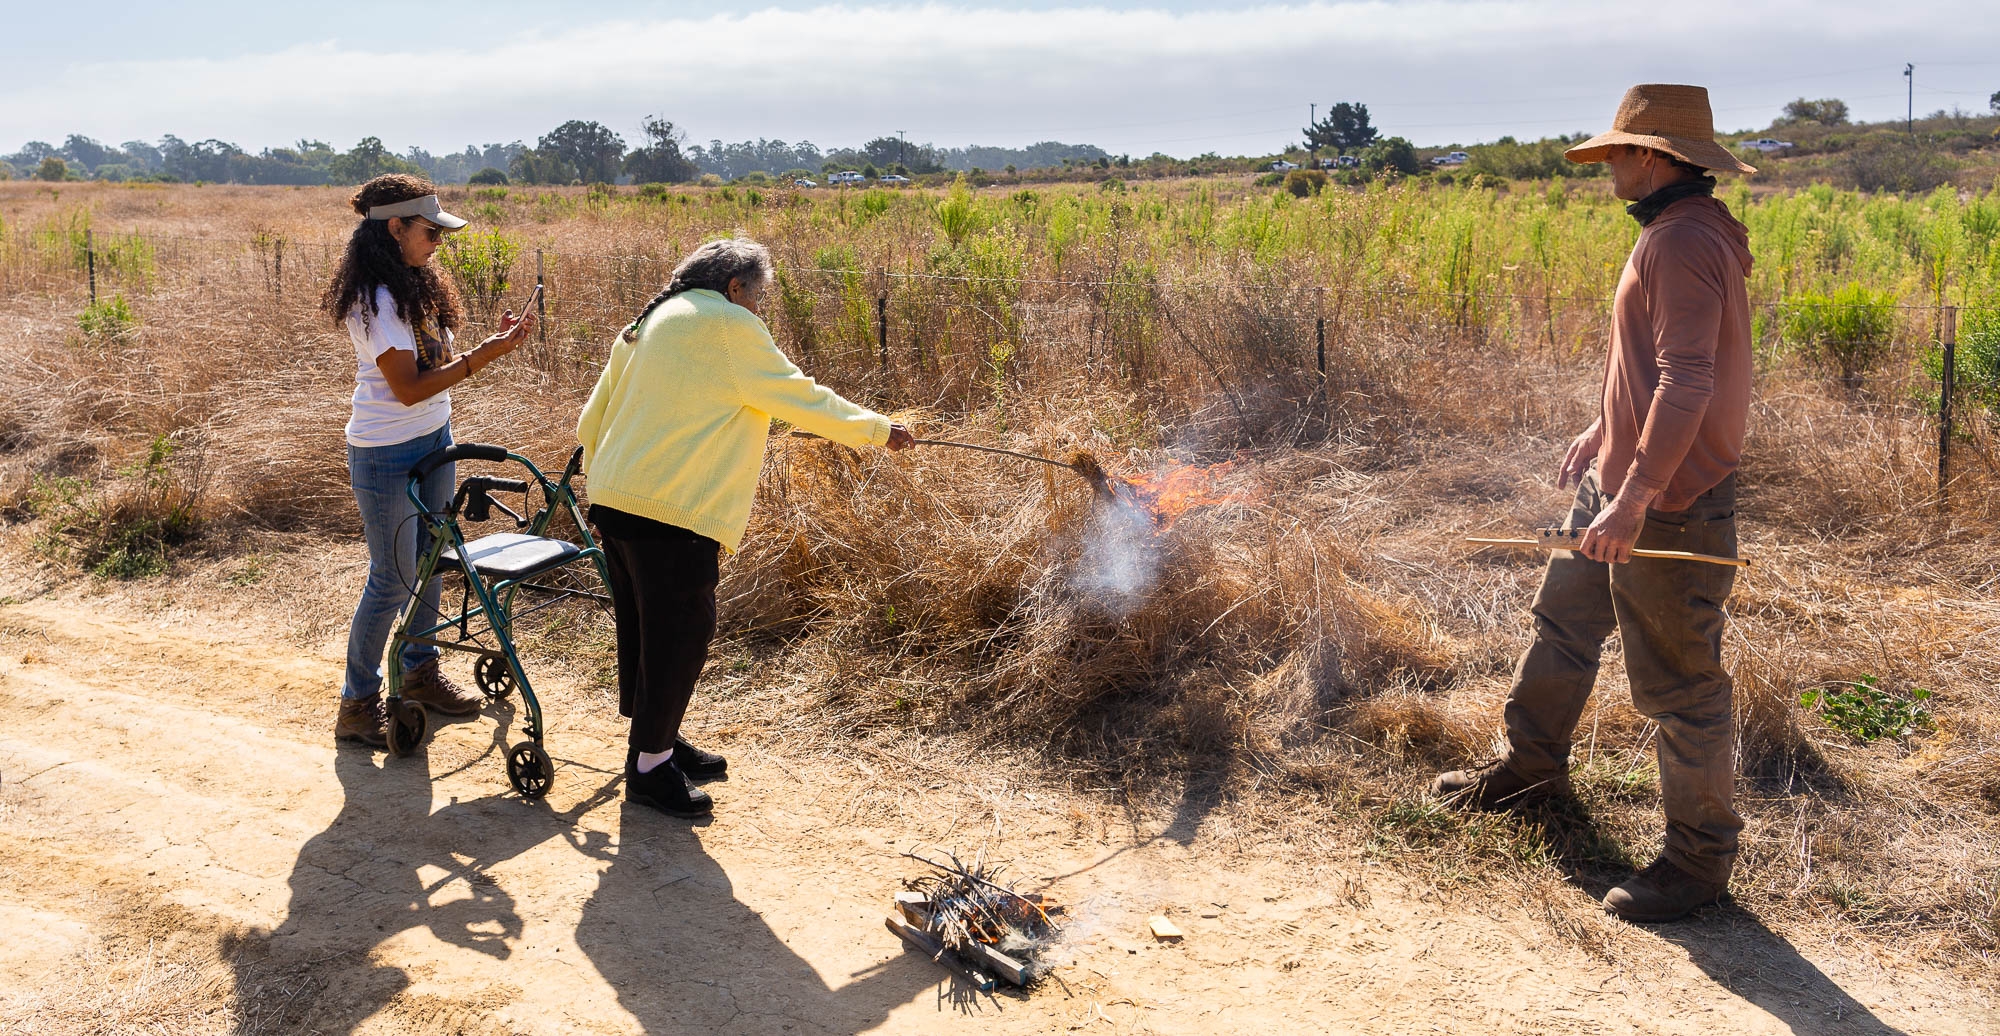 An elder woman in a yellow sweater stands near a mobility device to light a fire in dry brush, watched by two people.